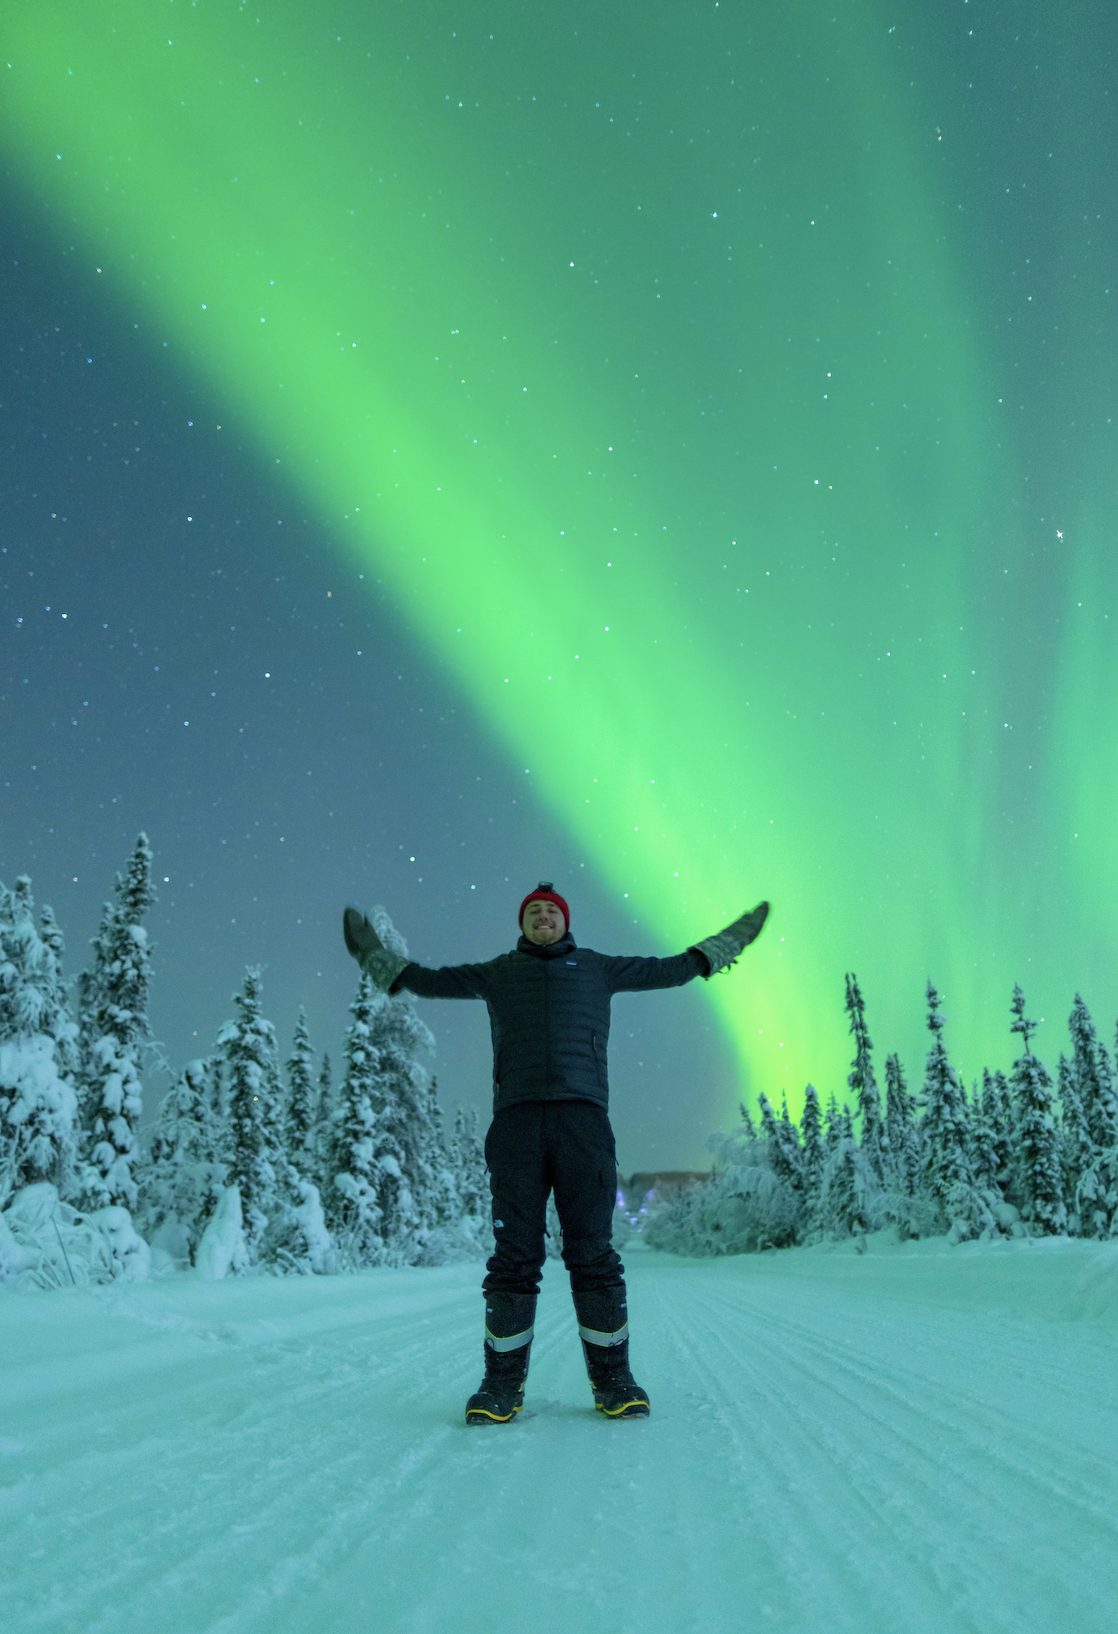 Photograph of Vincent Ledvina standing in snowy landscape with aurora in background